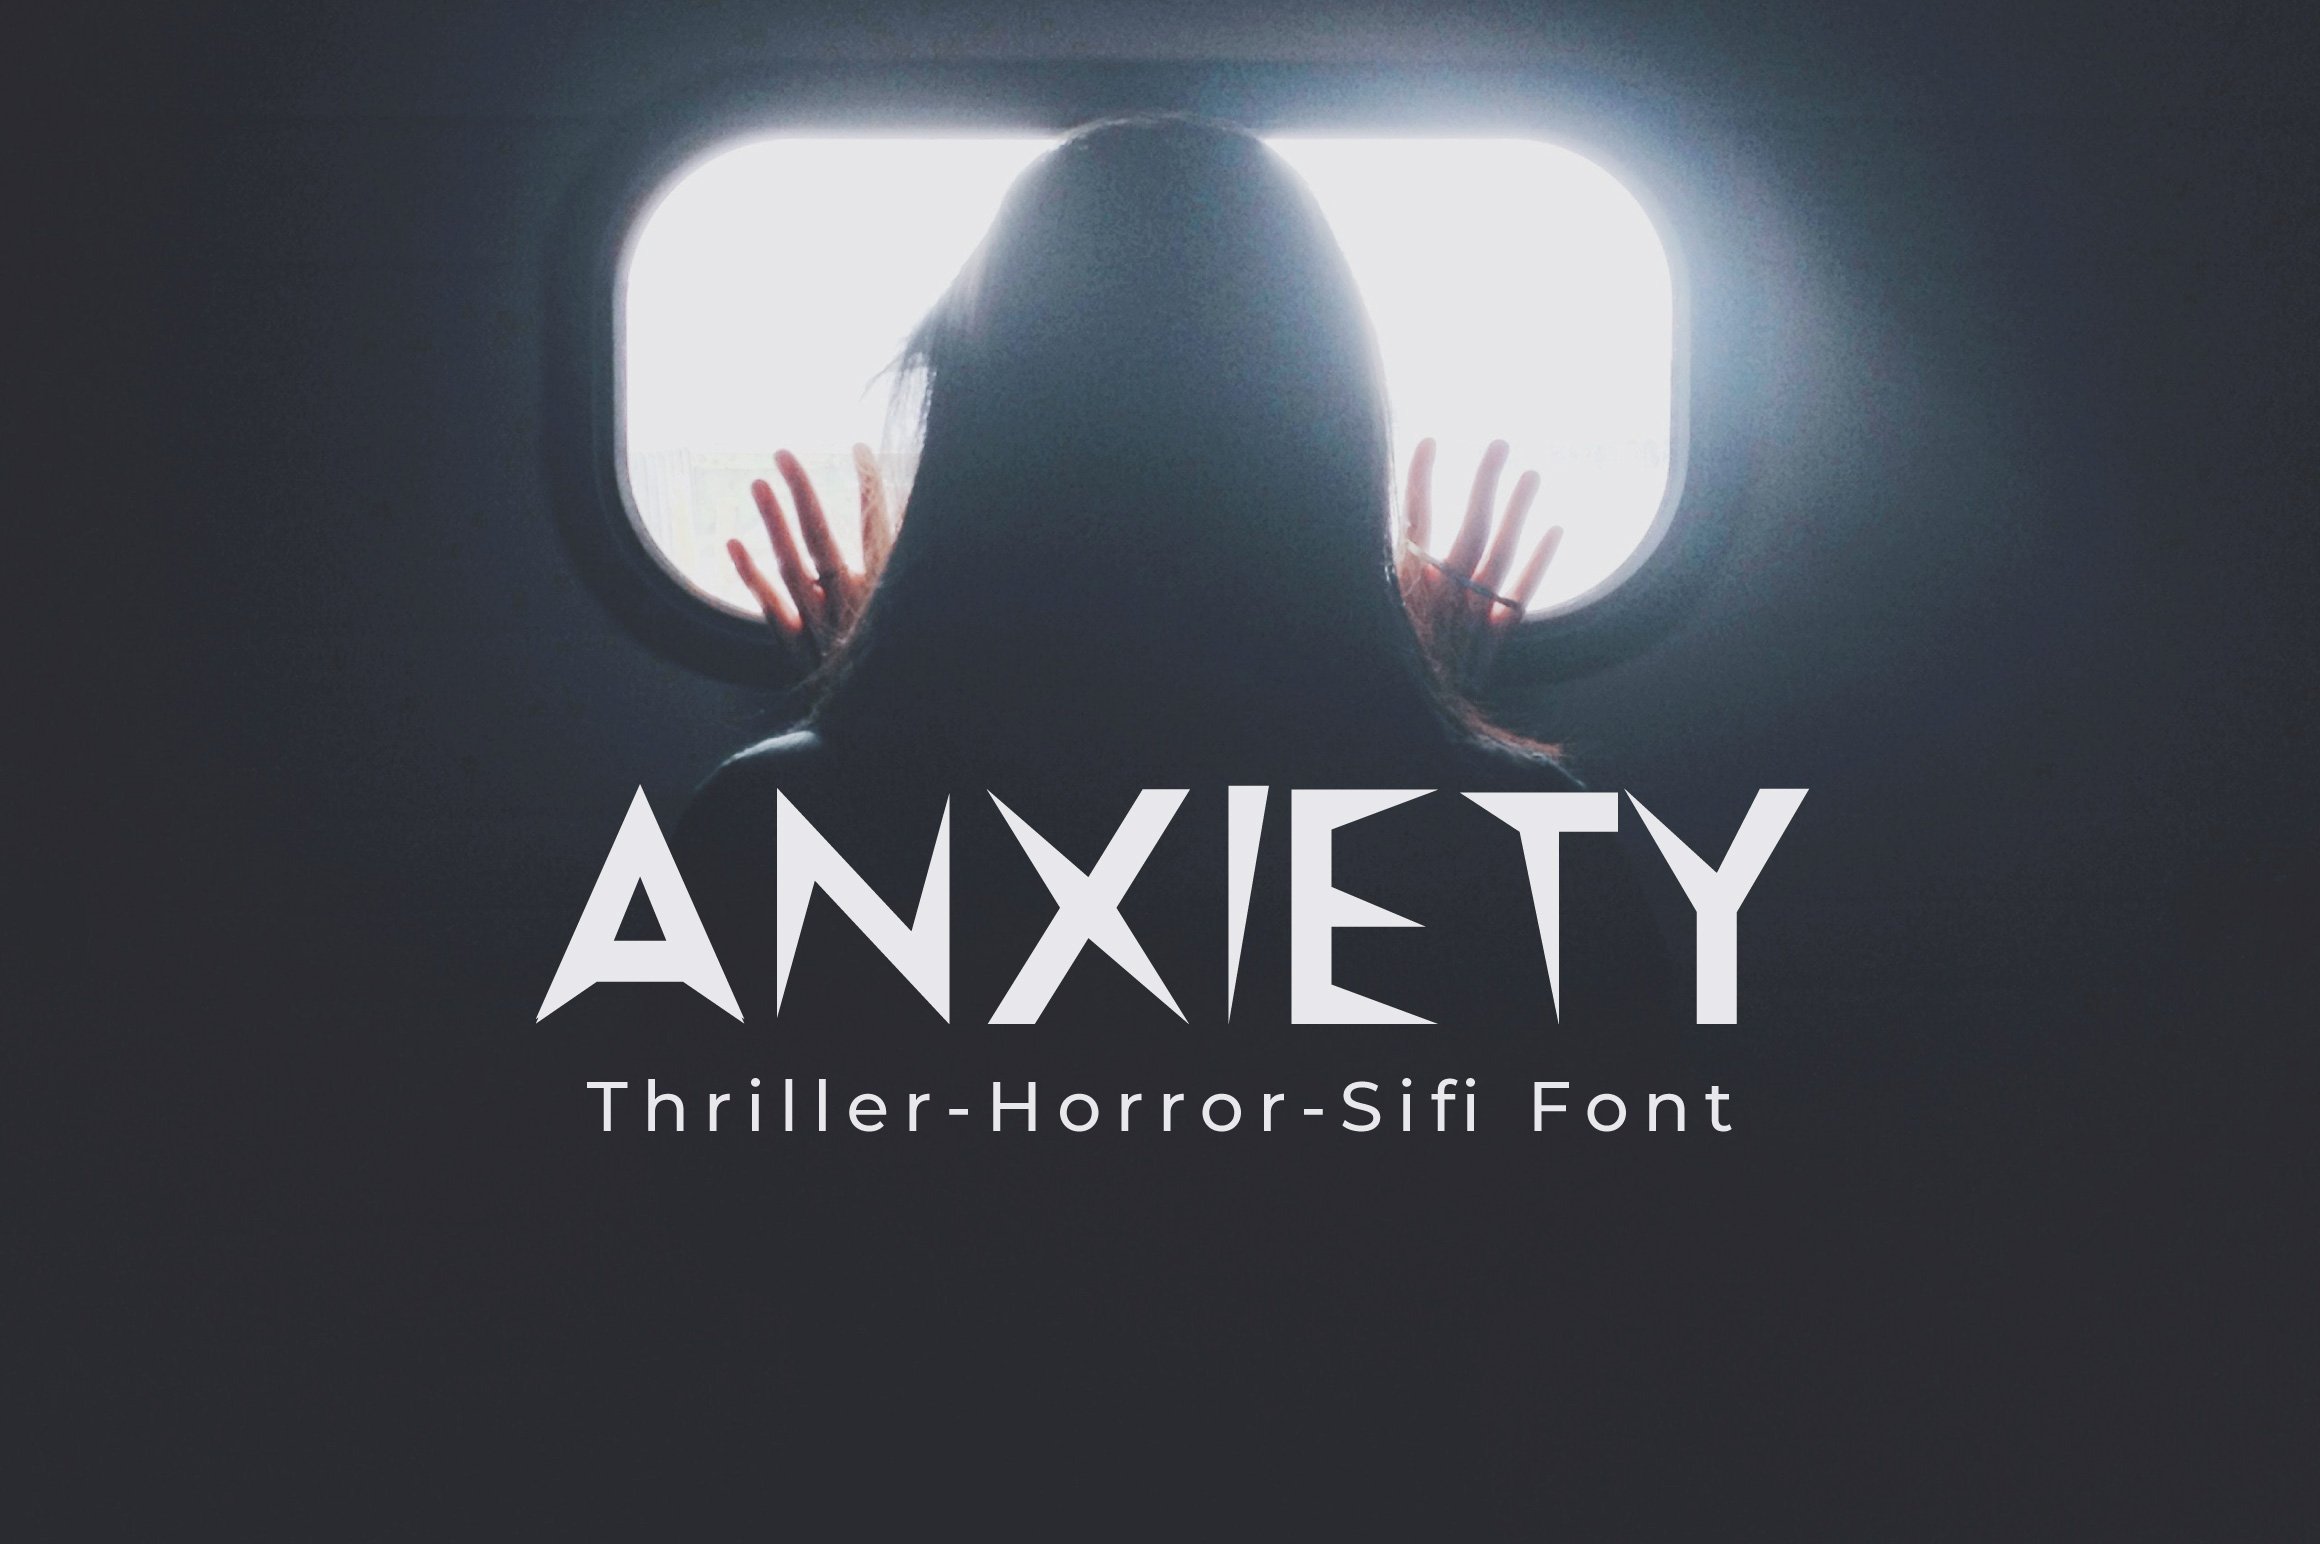 Anxiety Premium Font cover image.